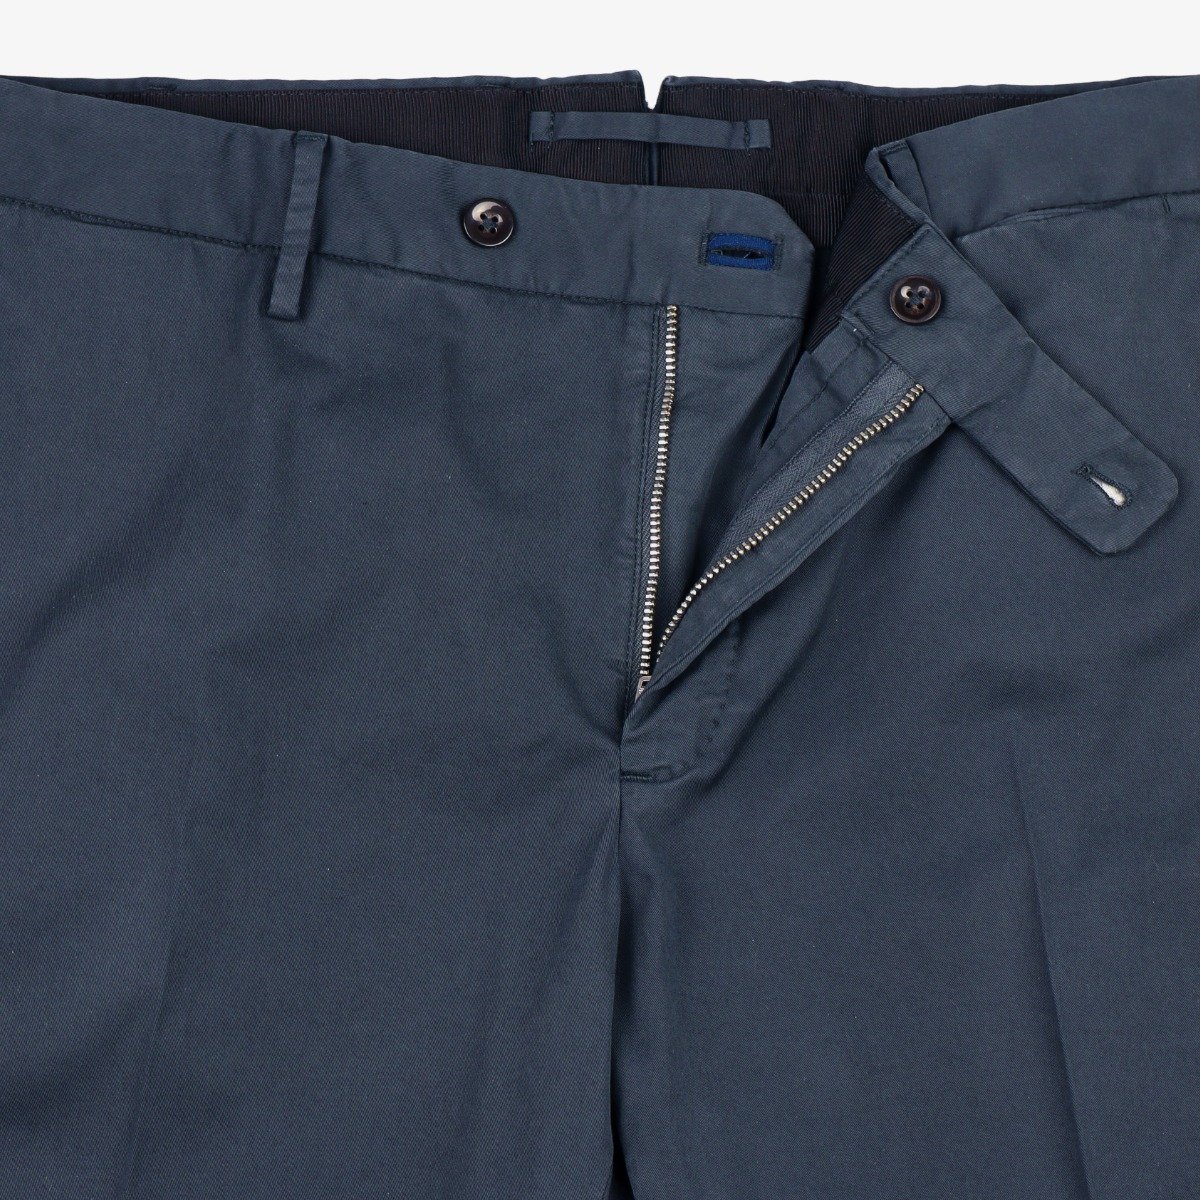 Incotex Model 30 navy slim fit stretch cotton trousers